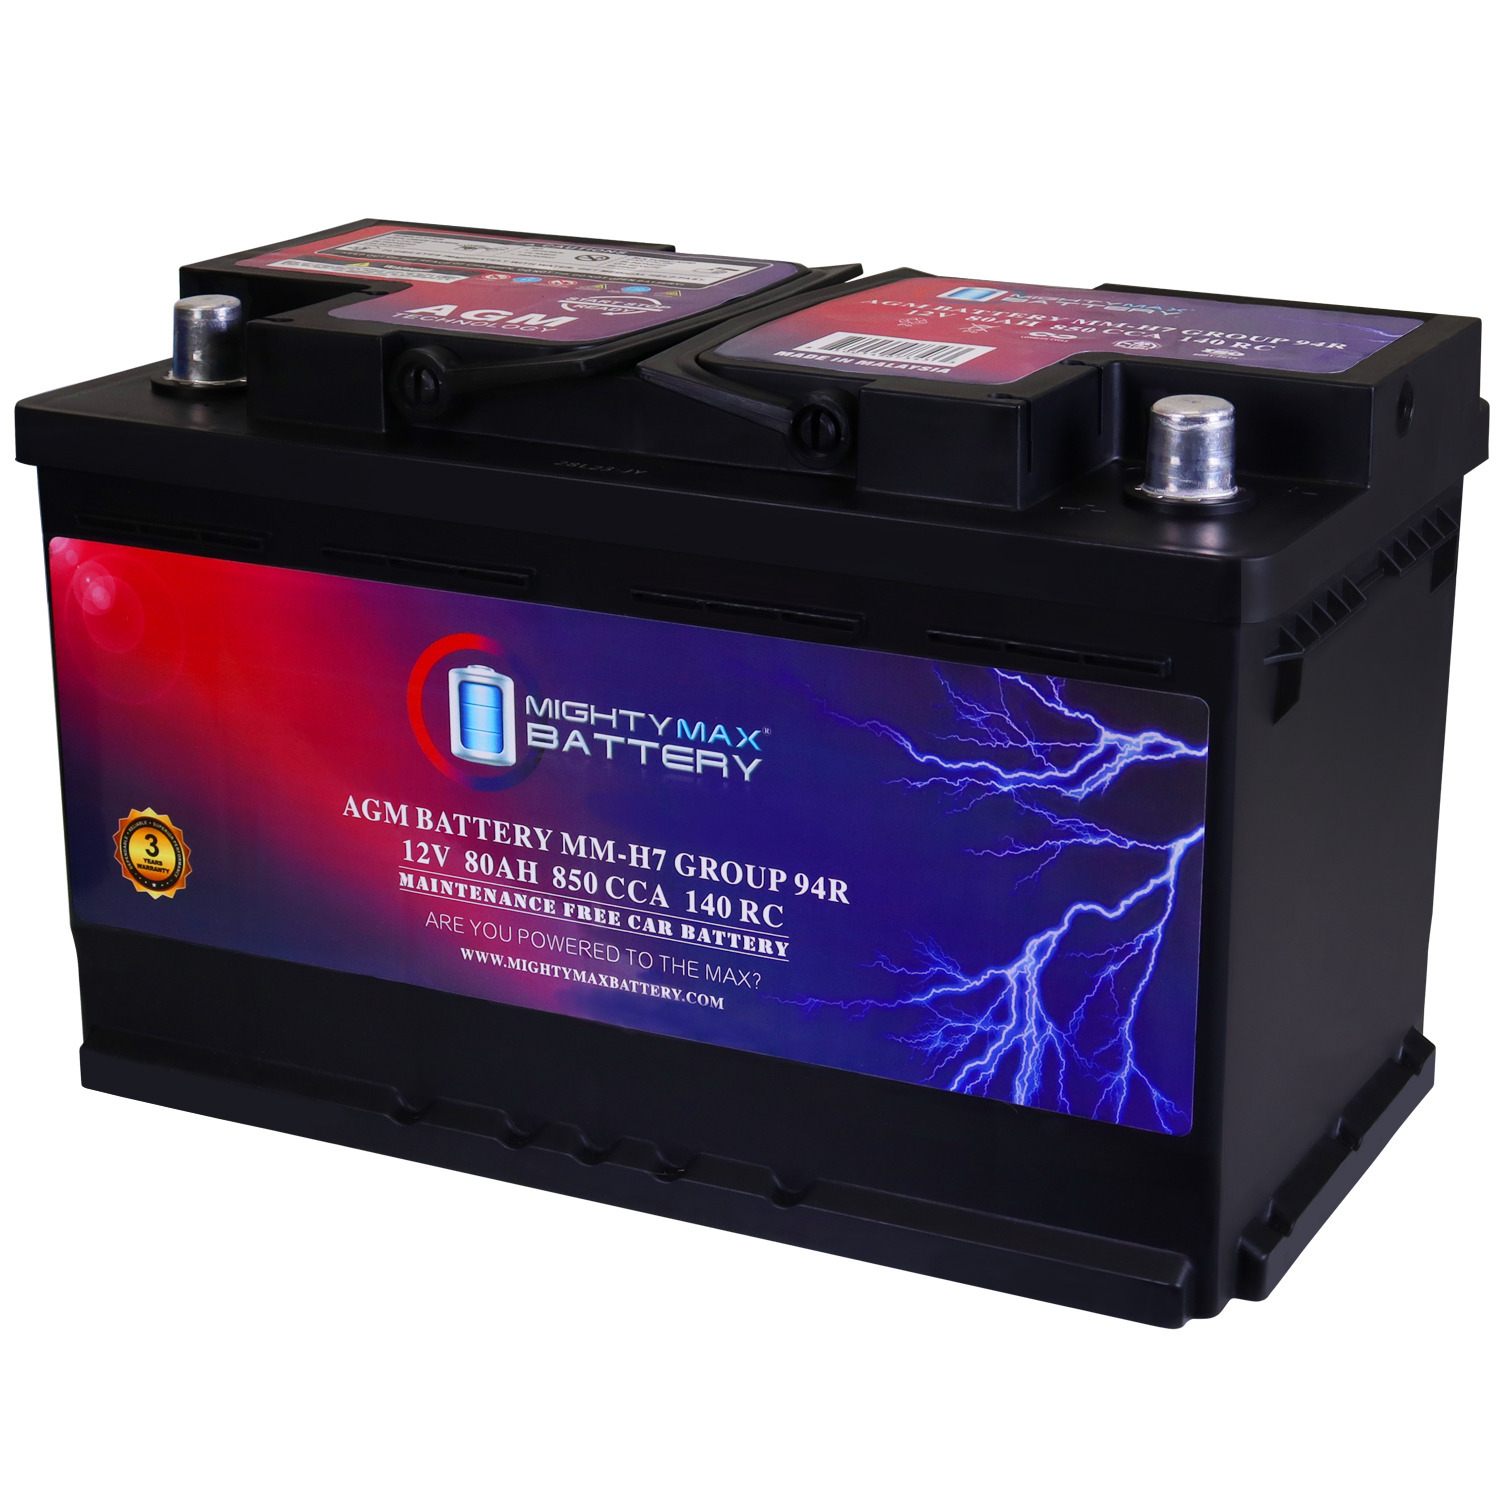 MM-H7 Group 94R 12V 80AH 140RC 850 CCA Replacement Battery Compatible with Audi RS 7 14-18